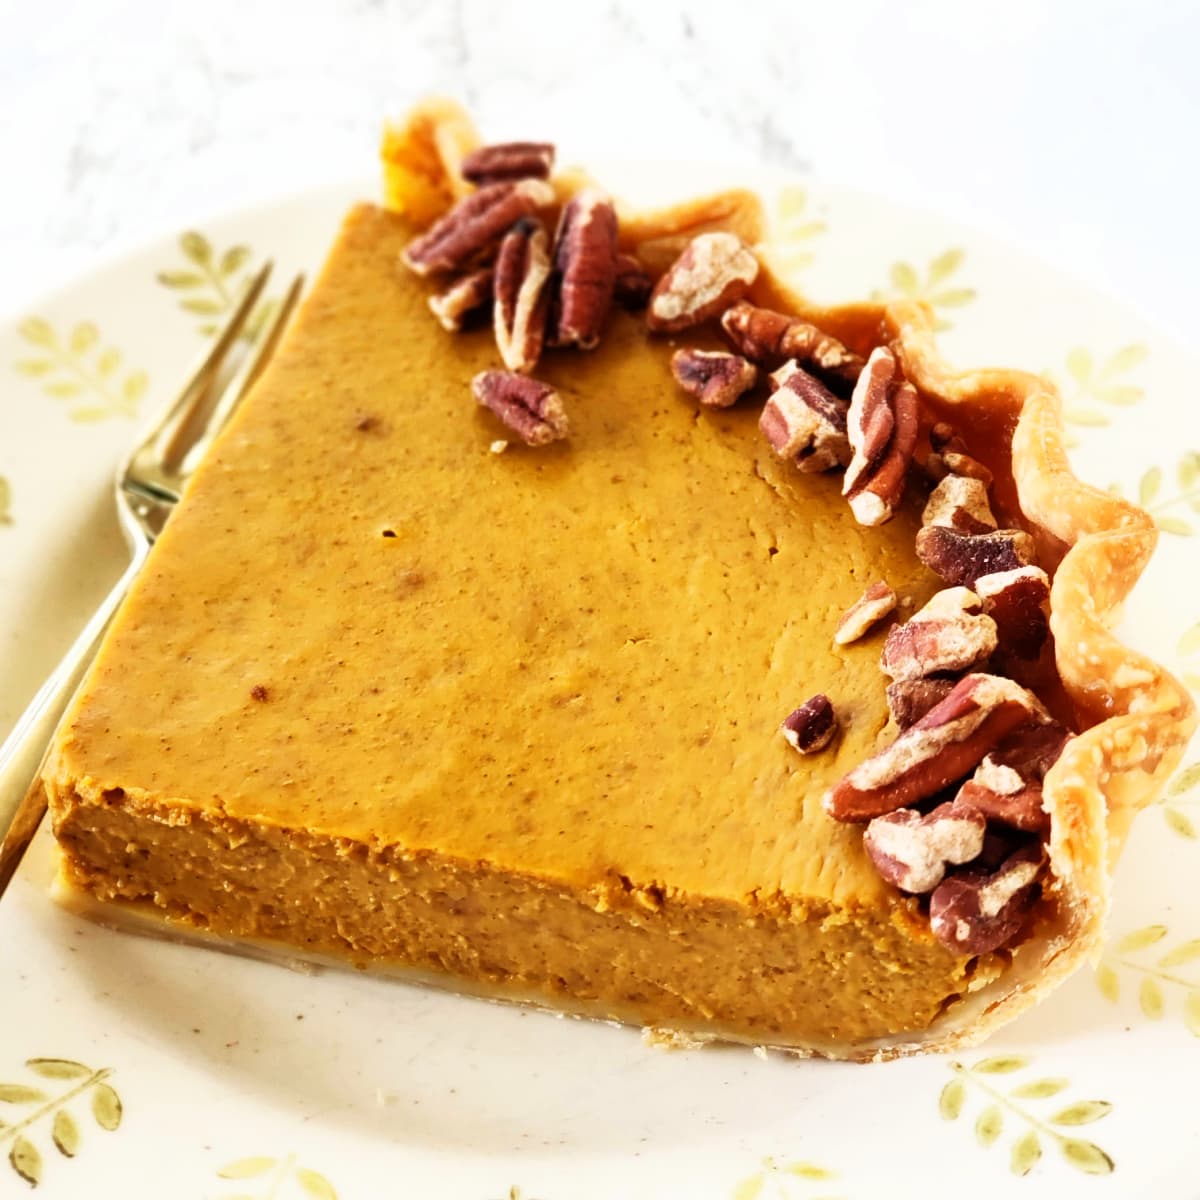 Wedge of Eggnog Pumpkin Pie with an outer rim of pecans on a beige plate with tree-decorated outer rim on ShockinglyDelicious.com